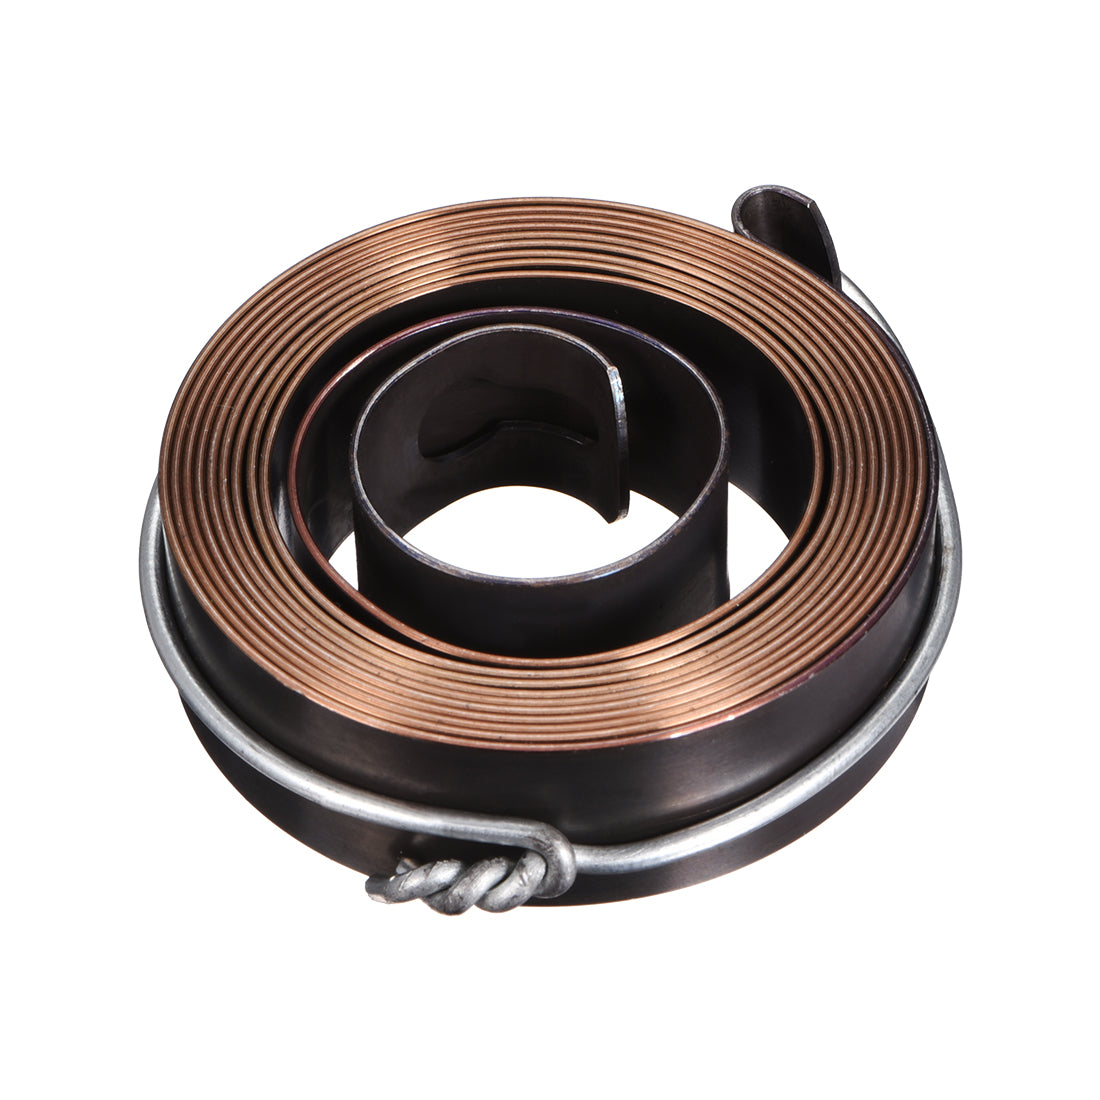 uxcell Uxcell Drill Press Spring Quill Feed Return Coil Spring Blackening 1800mm 65.5x19x1mm